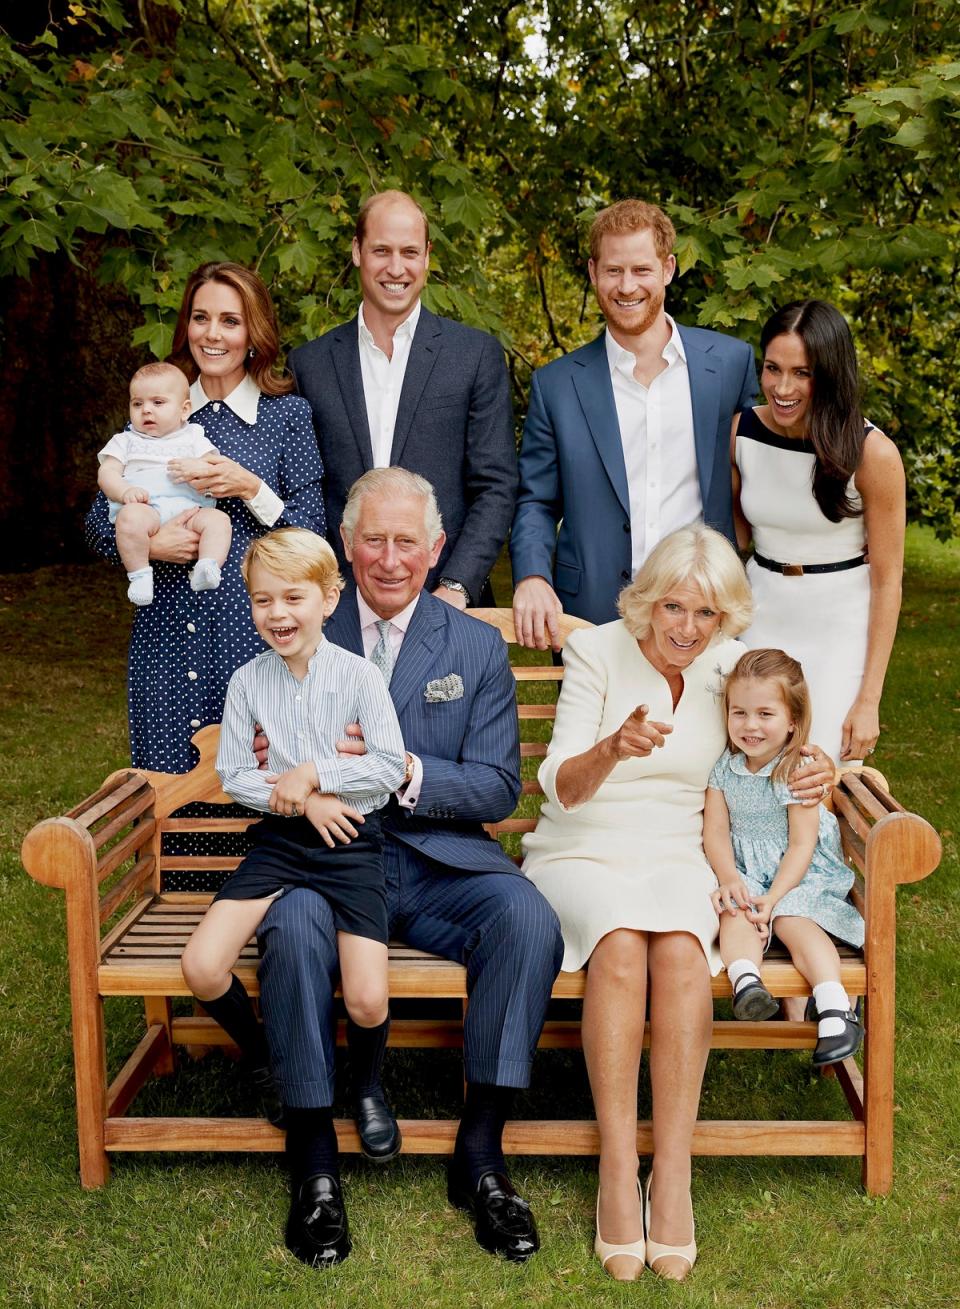 The Prince of Wales poses for an official portrait to mark his 70th Birthday in the gardens of Clarence House, with his wife Camilla Duchess of Cornwall, Prince Willliam Duke of Cambridge, Catherine Duchess of Cambridge, Prince George, Princess Charlotte, Prince Louis, Prince Harry Duke of Sussex and Meghan Duchess of Sussex (Chris Jackson/AP)